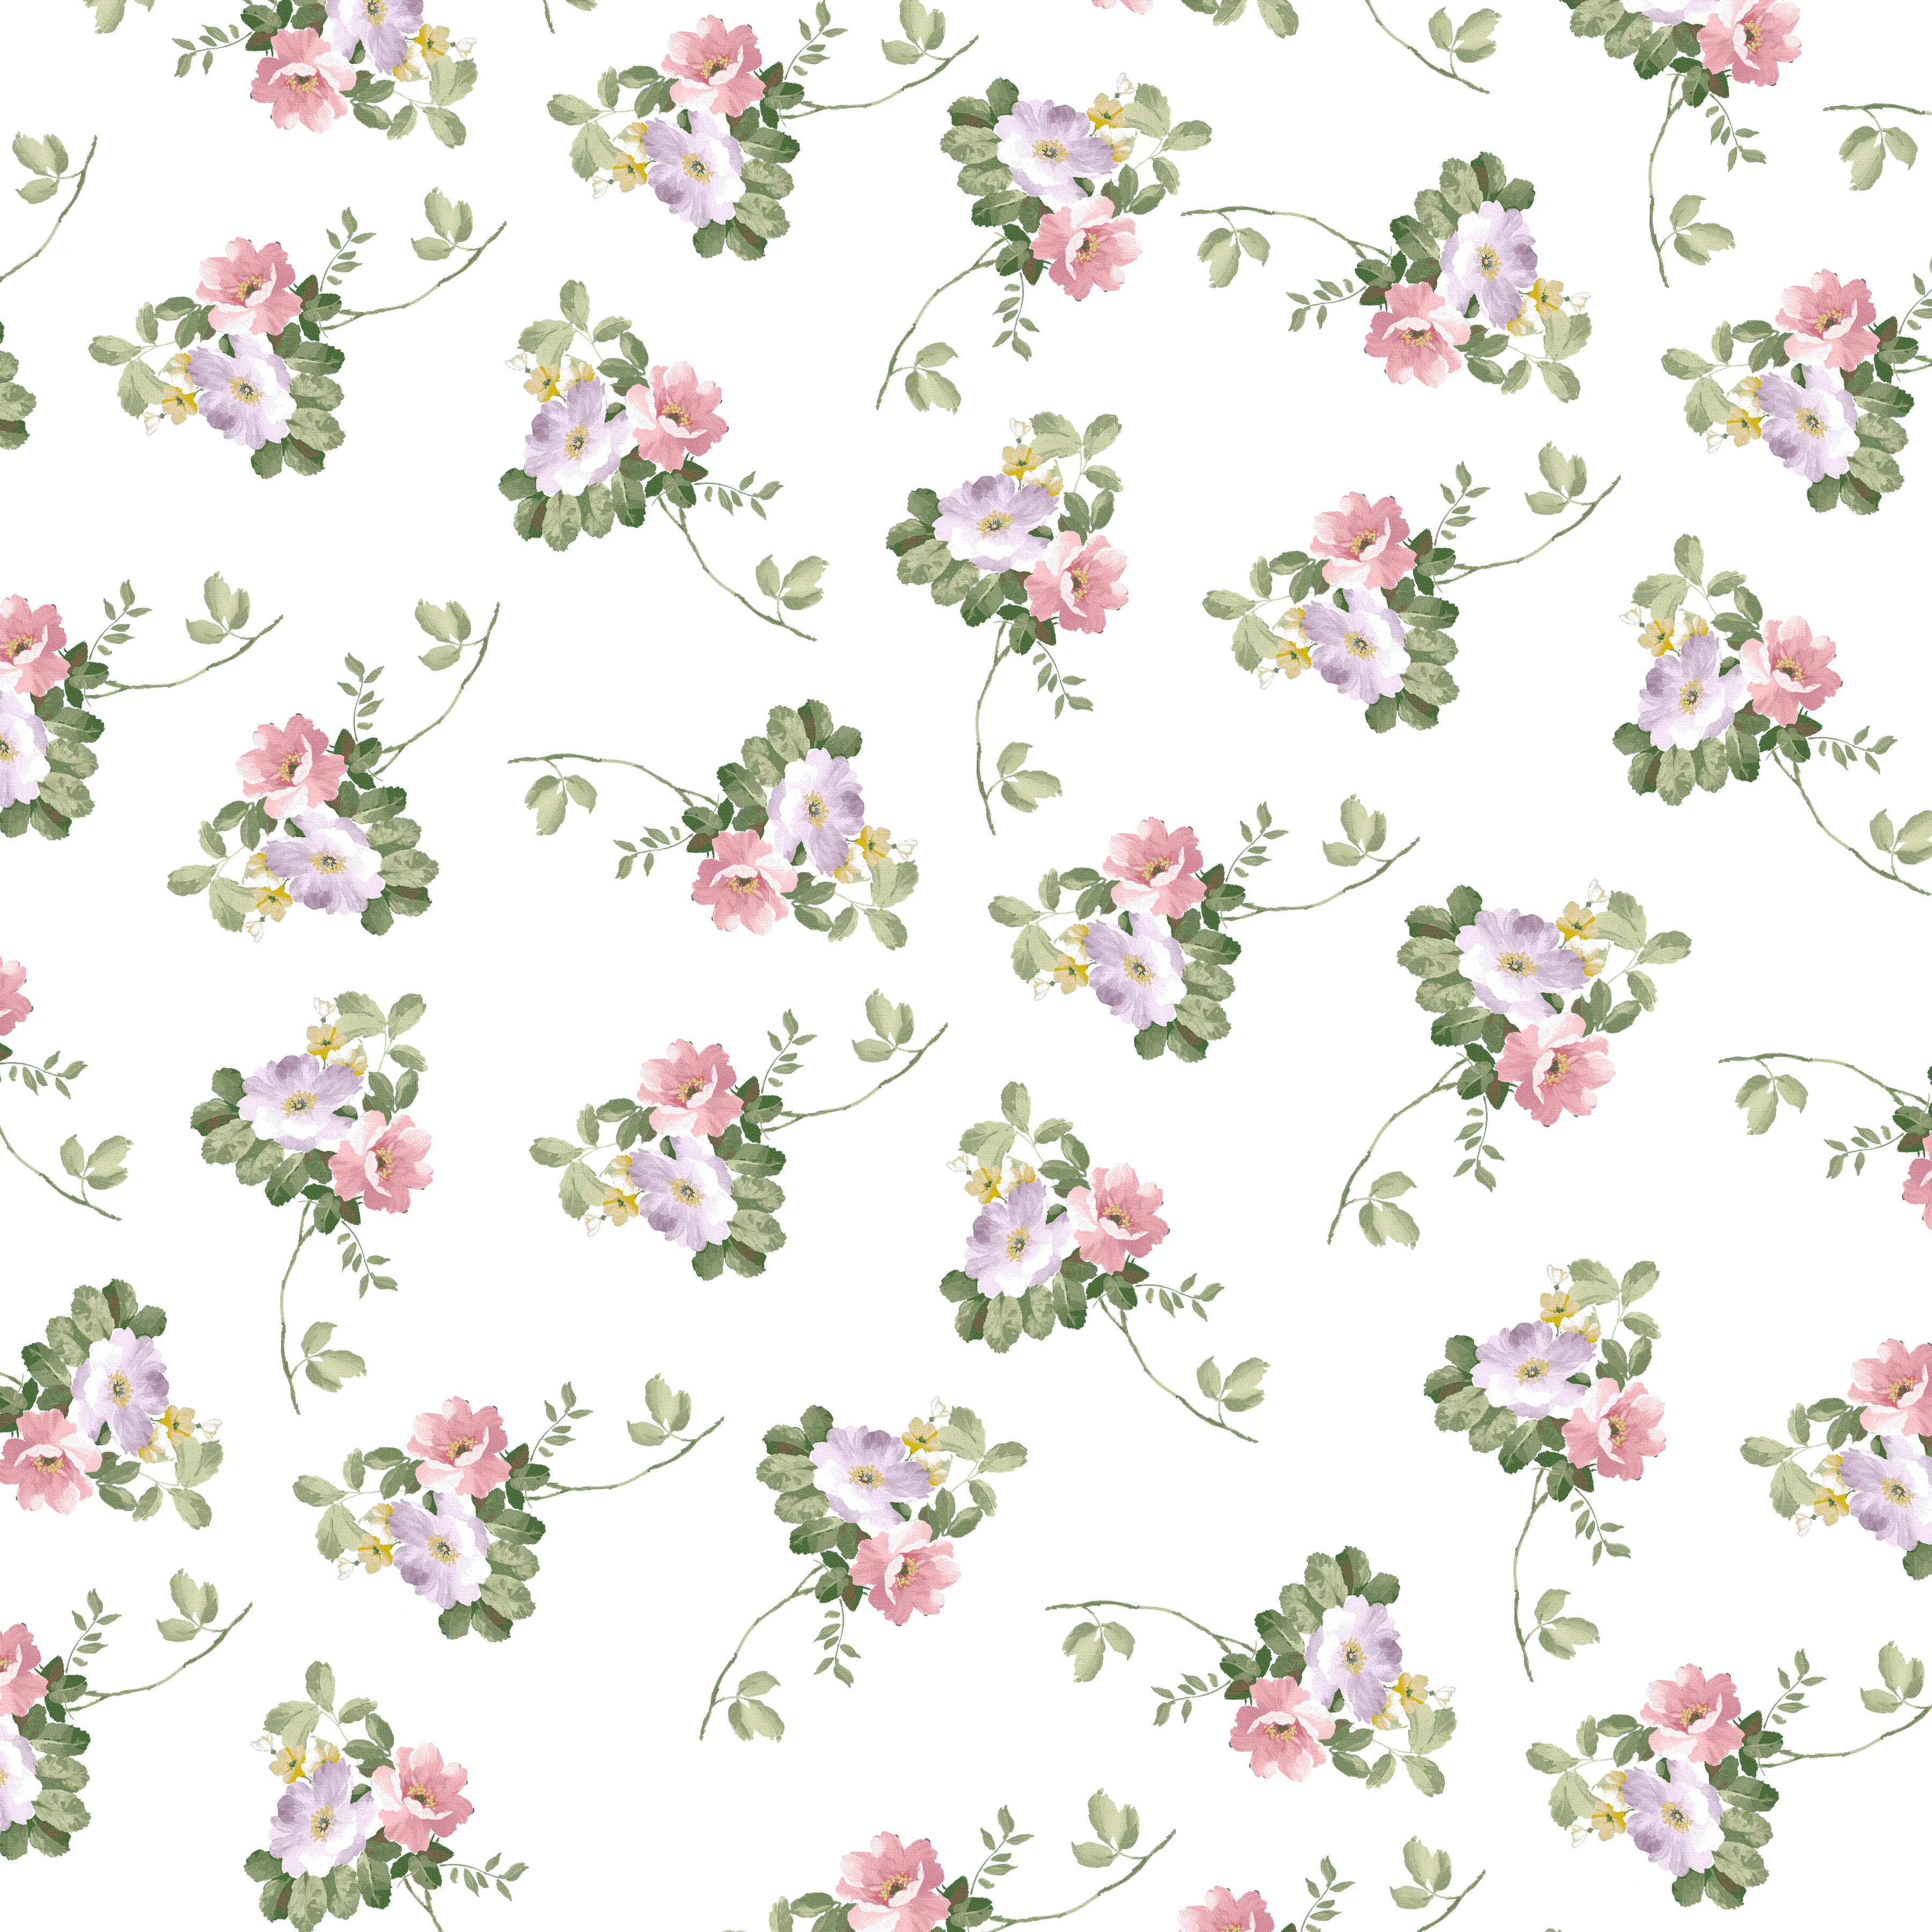 Fashion flowers floral background. Flower pattern png